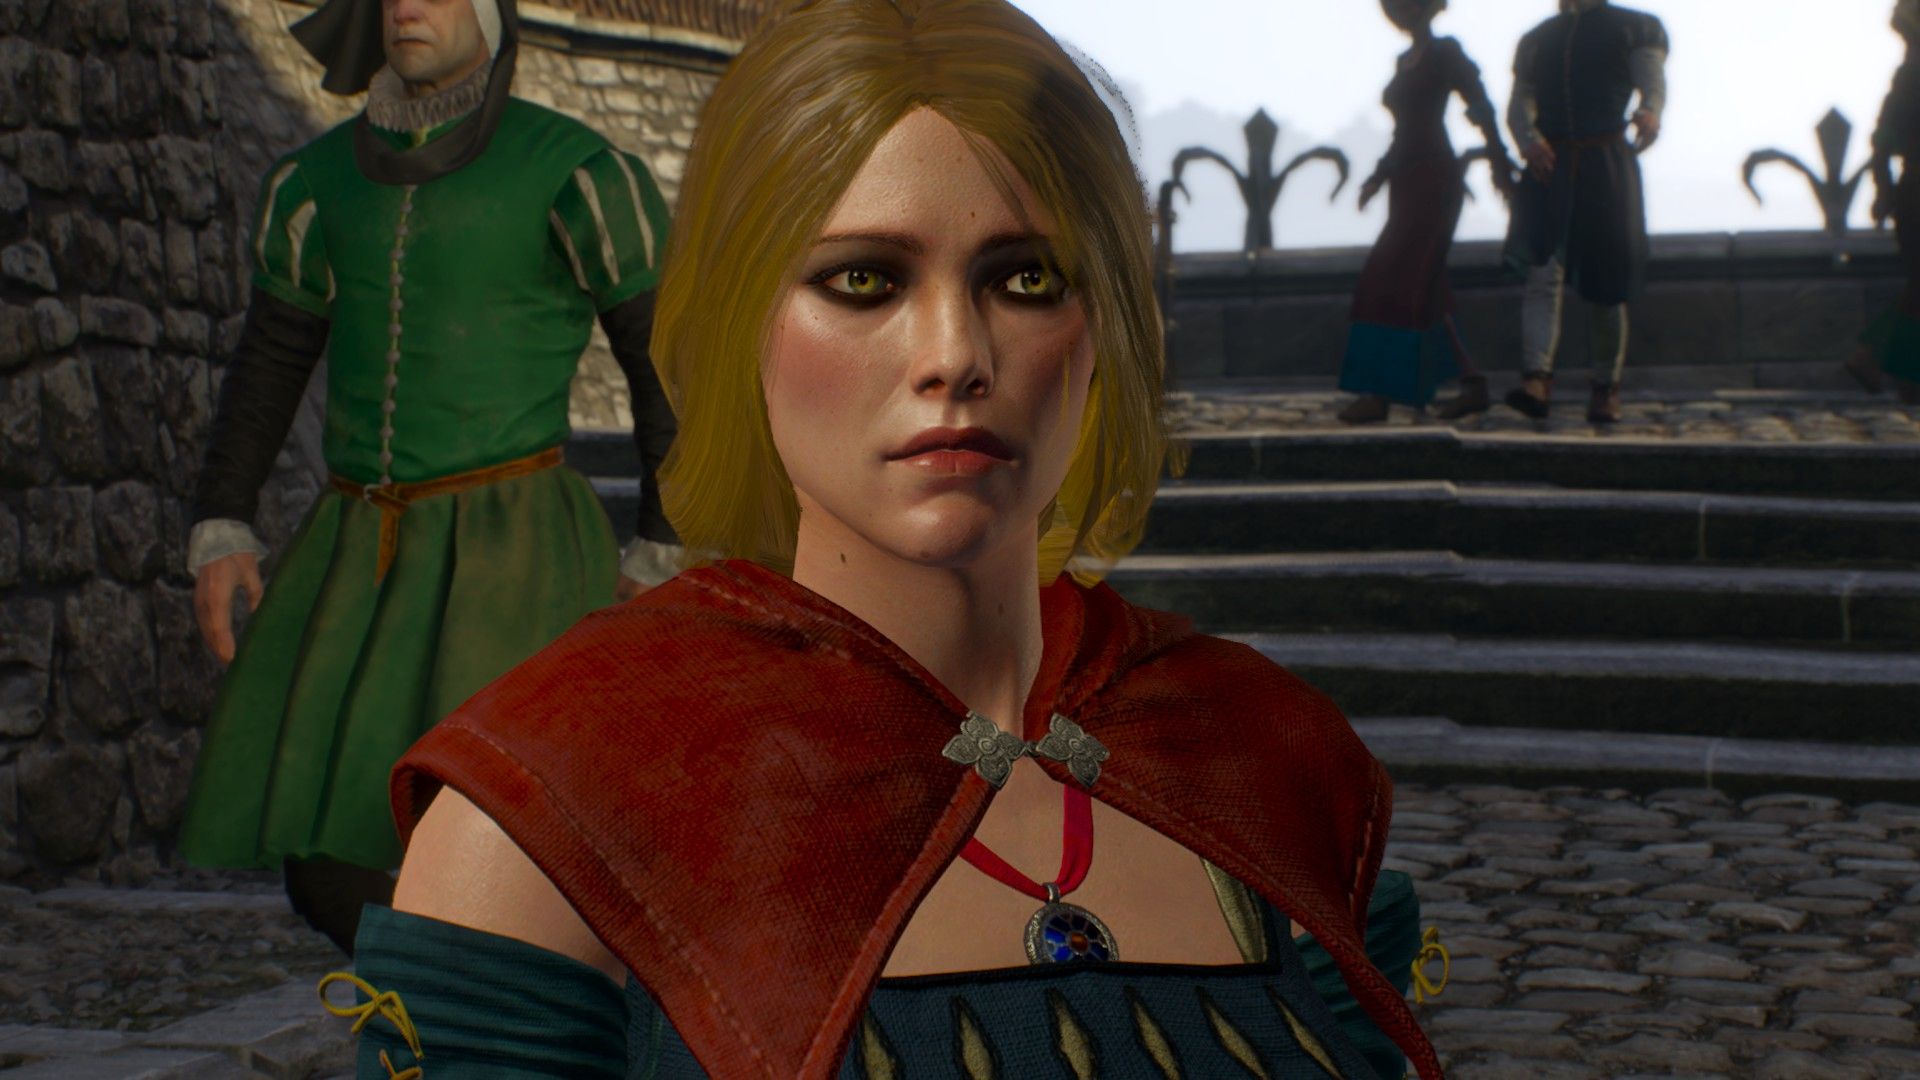 A blonde woman dressed in fine, medieval clothes stands on a stone bridge in The Witcher 3's city of Novigrad.